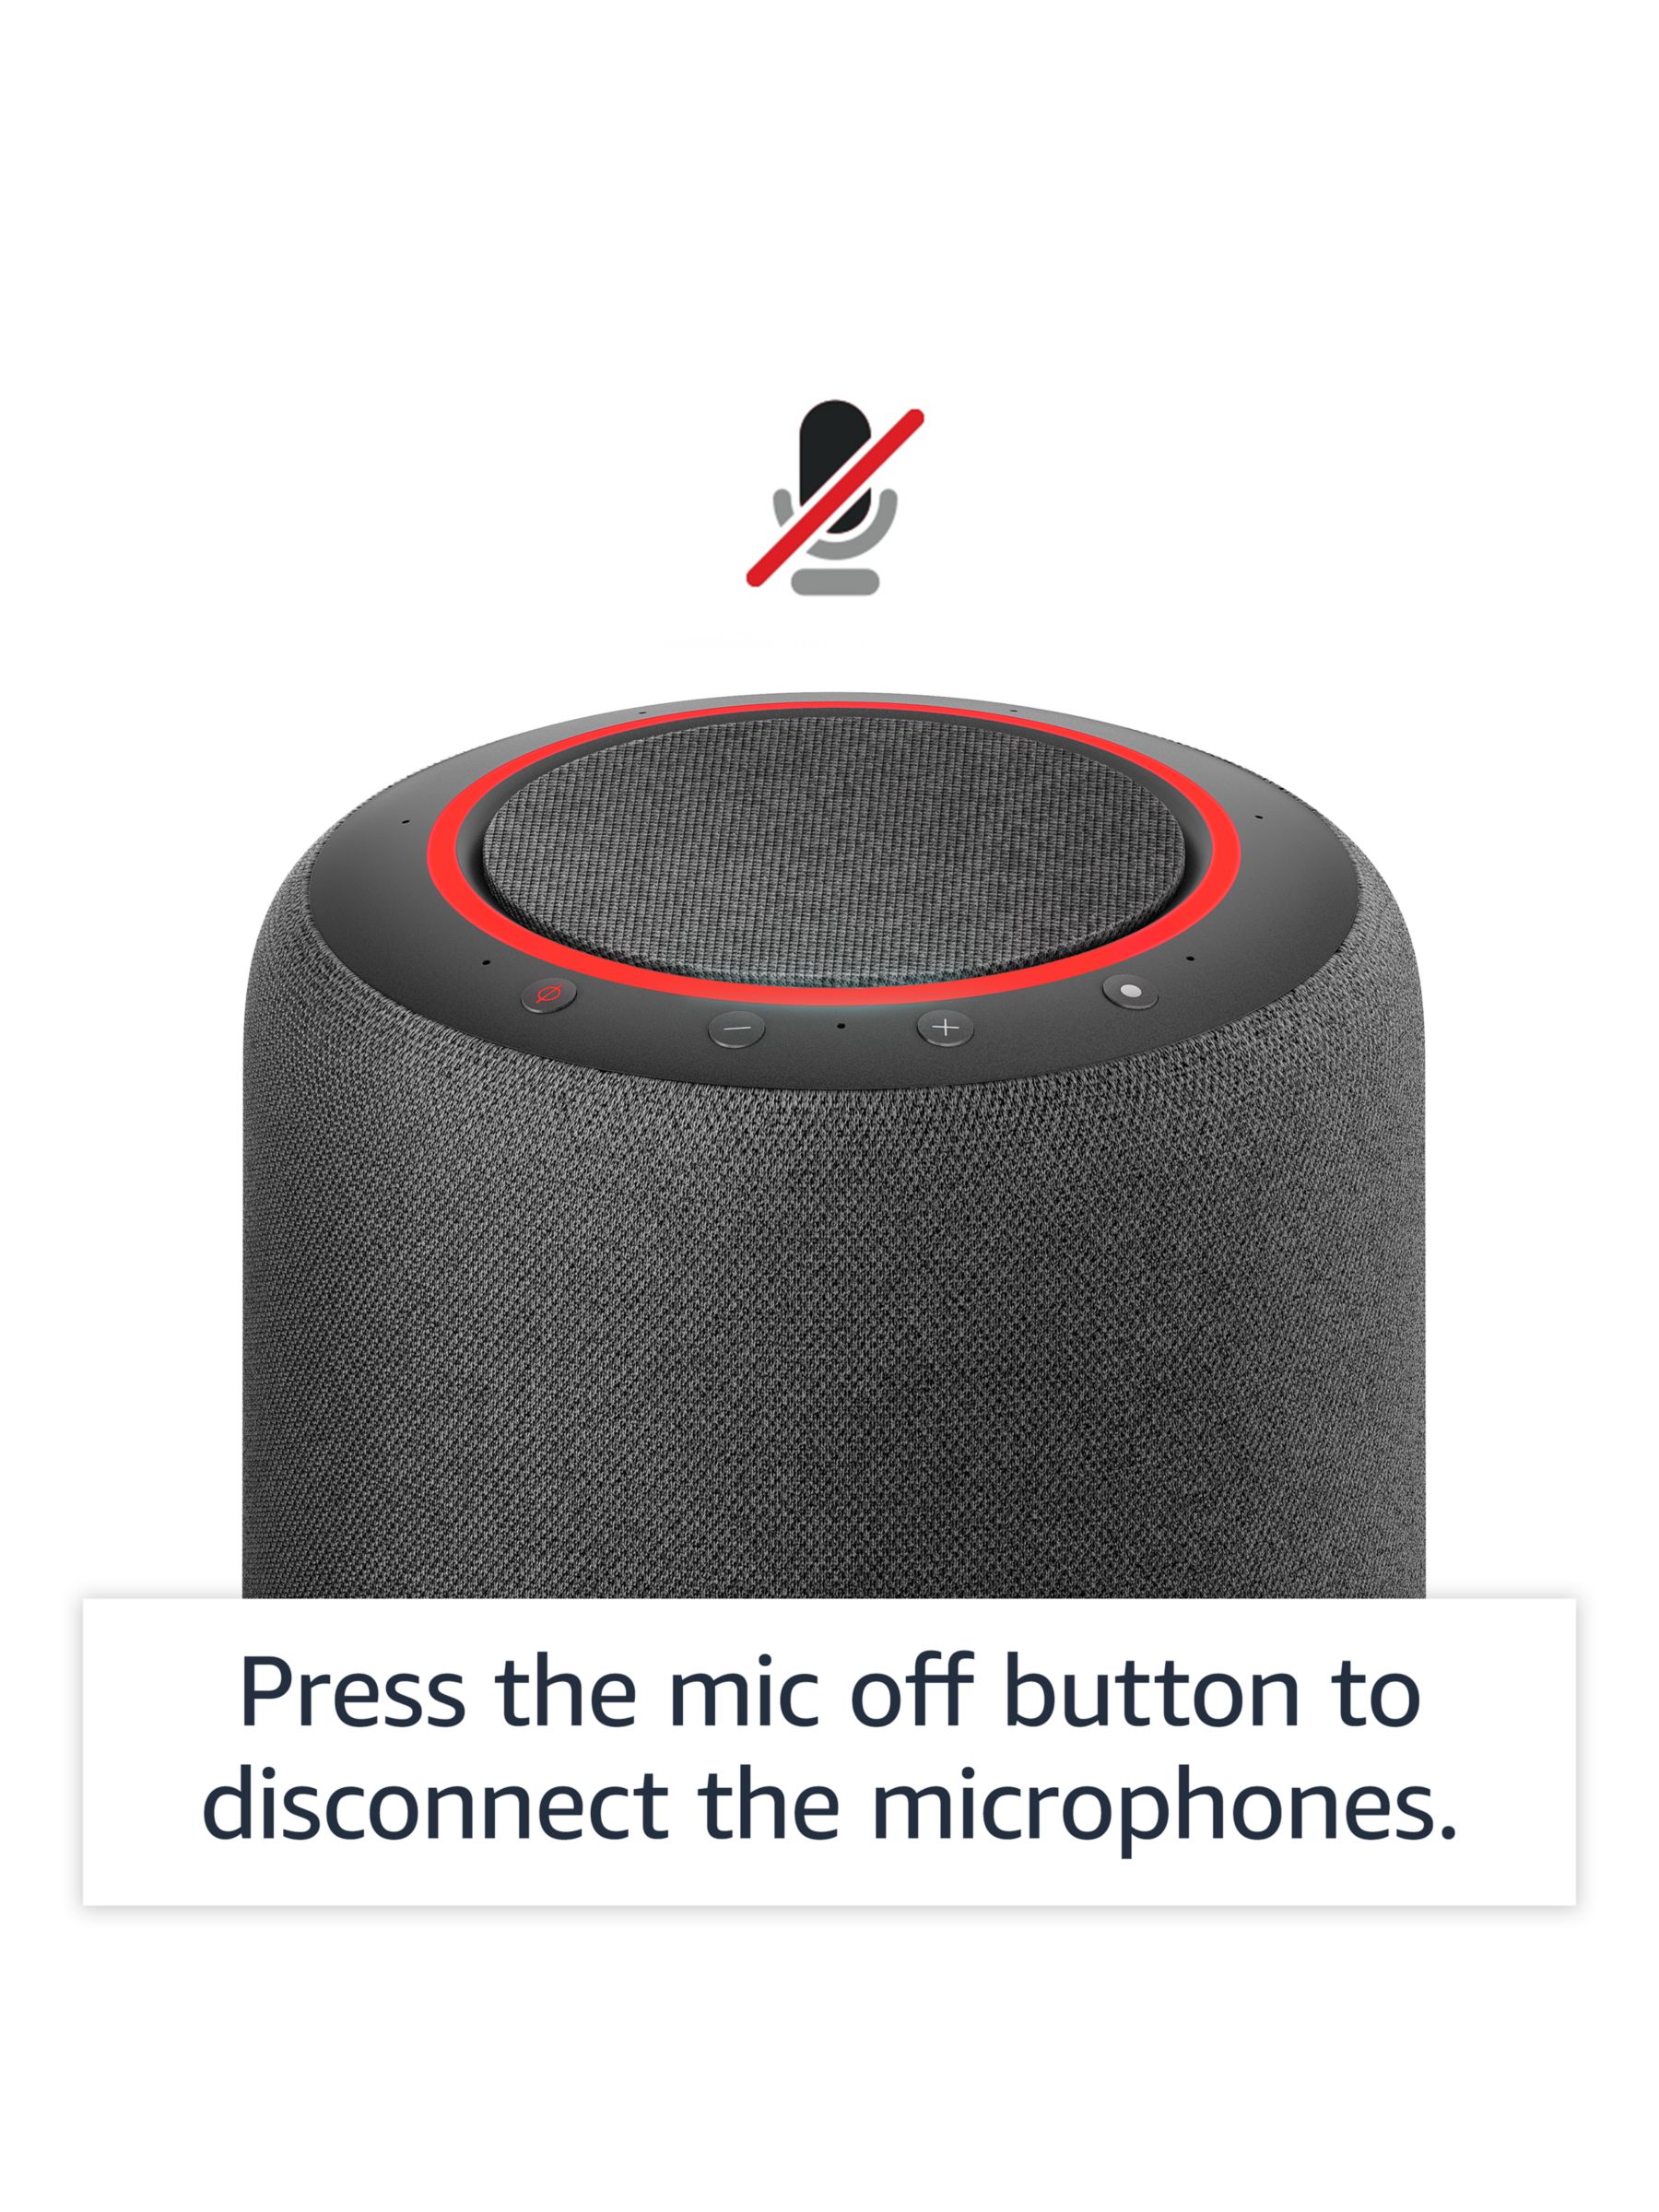 Echo Sub - Powerful subwoofer for your Echo - requires compatible Echo  device